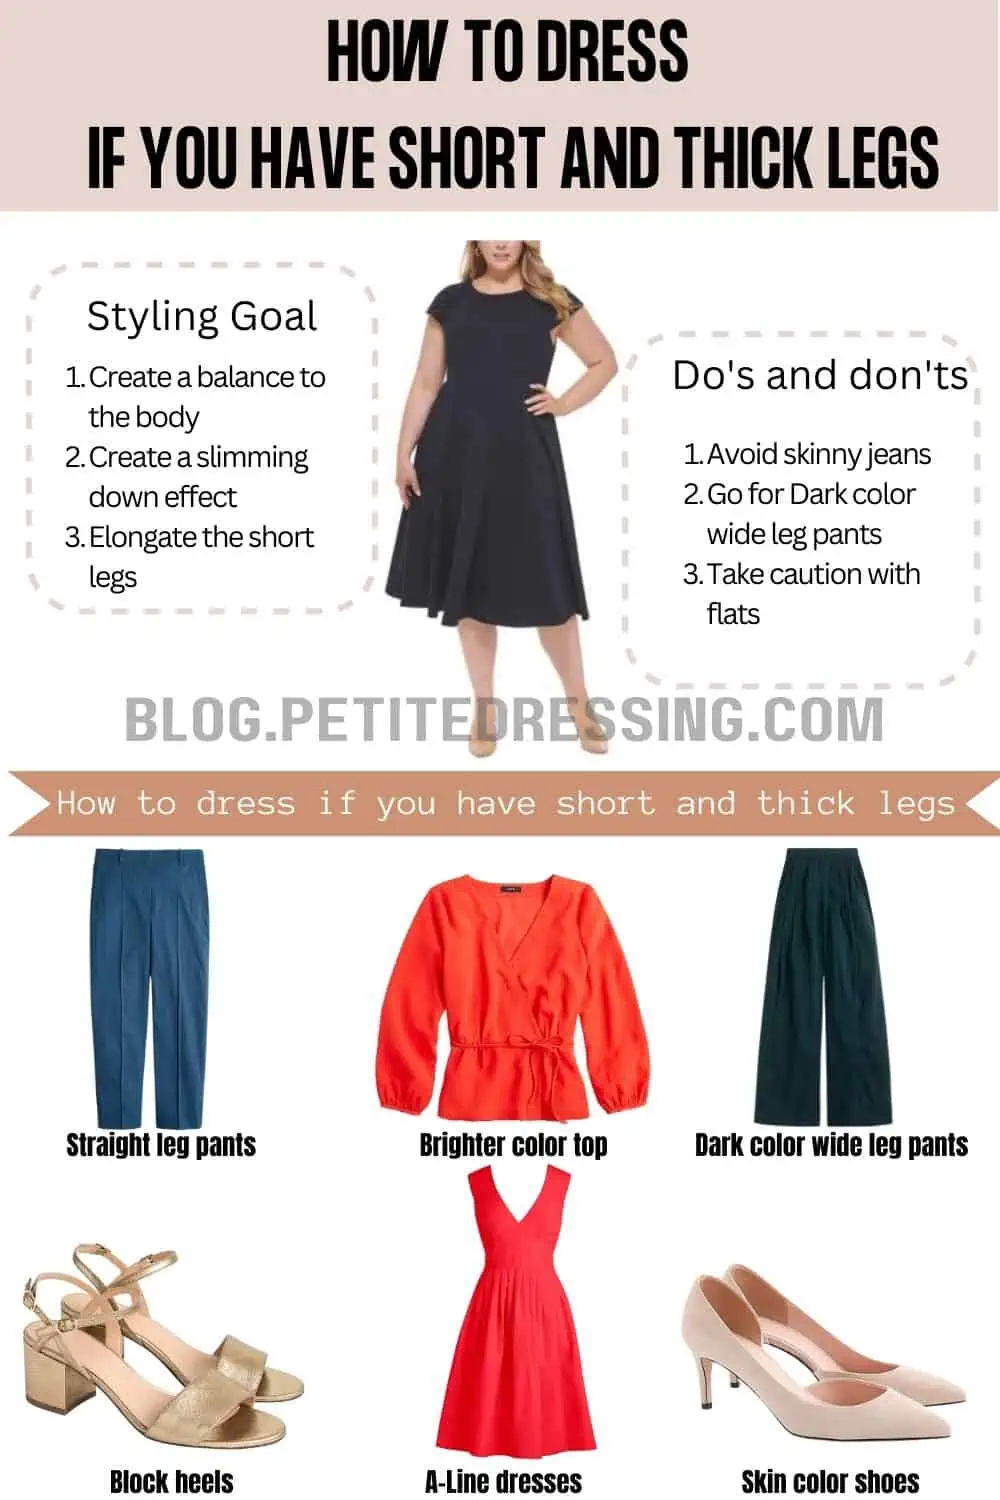 How to wear wide leg pants if you have short legs (like me) 